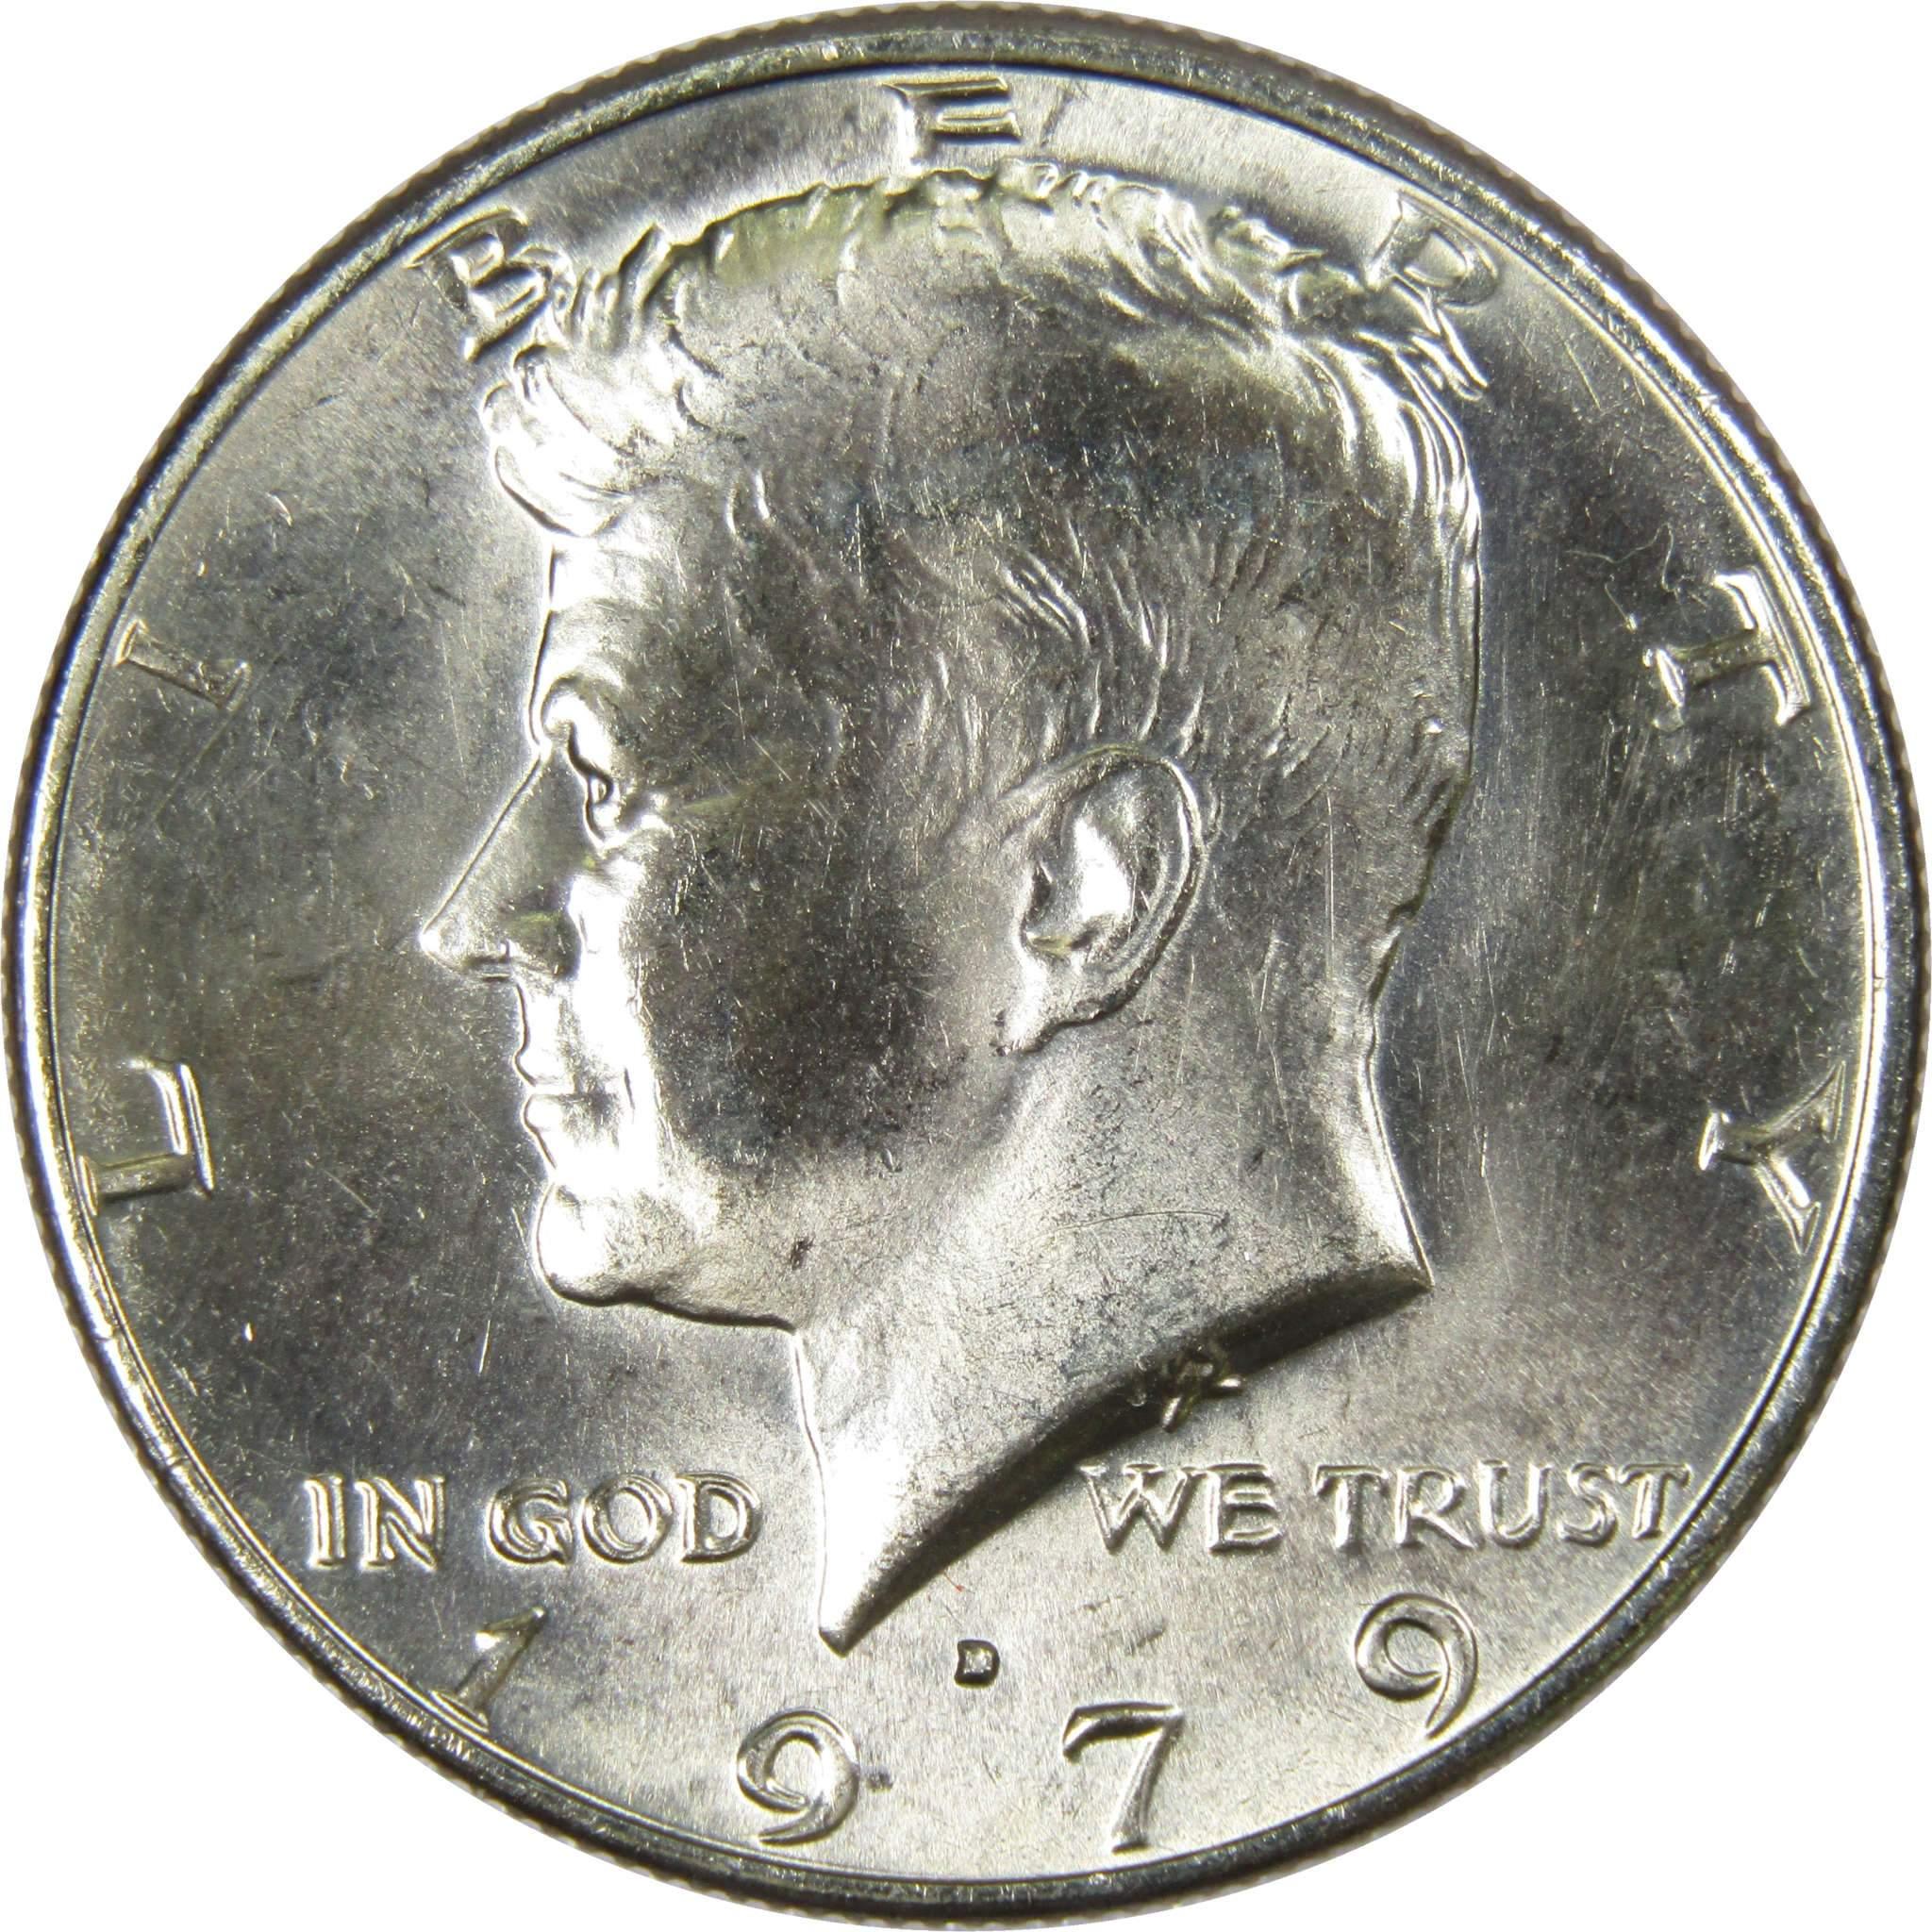 1979 D Kennedy Half Dollar BU Uncirculated Mint State 50c US Coin Collectible